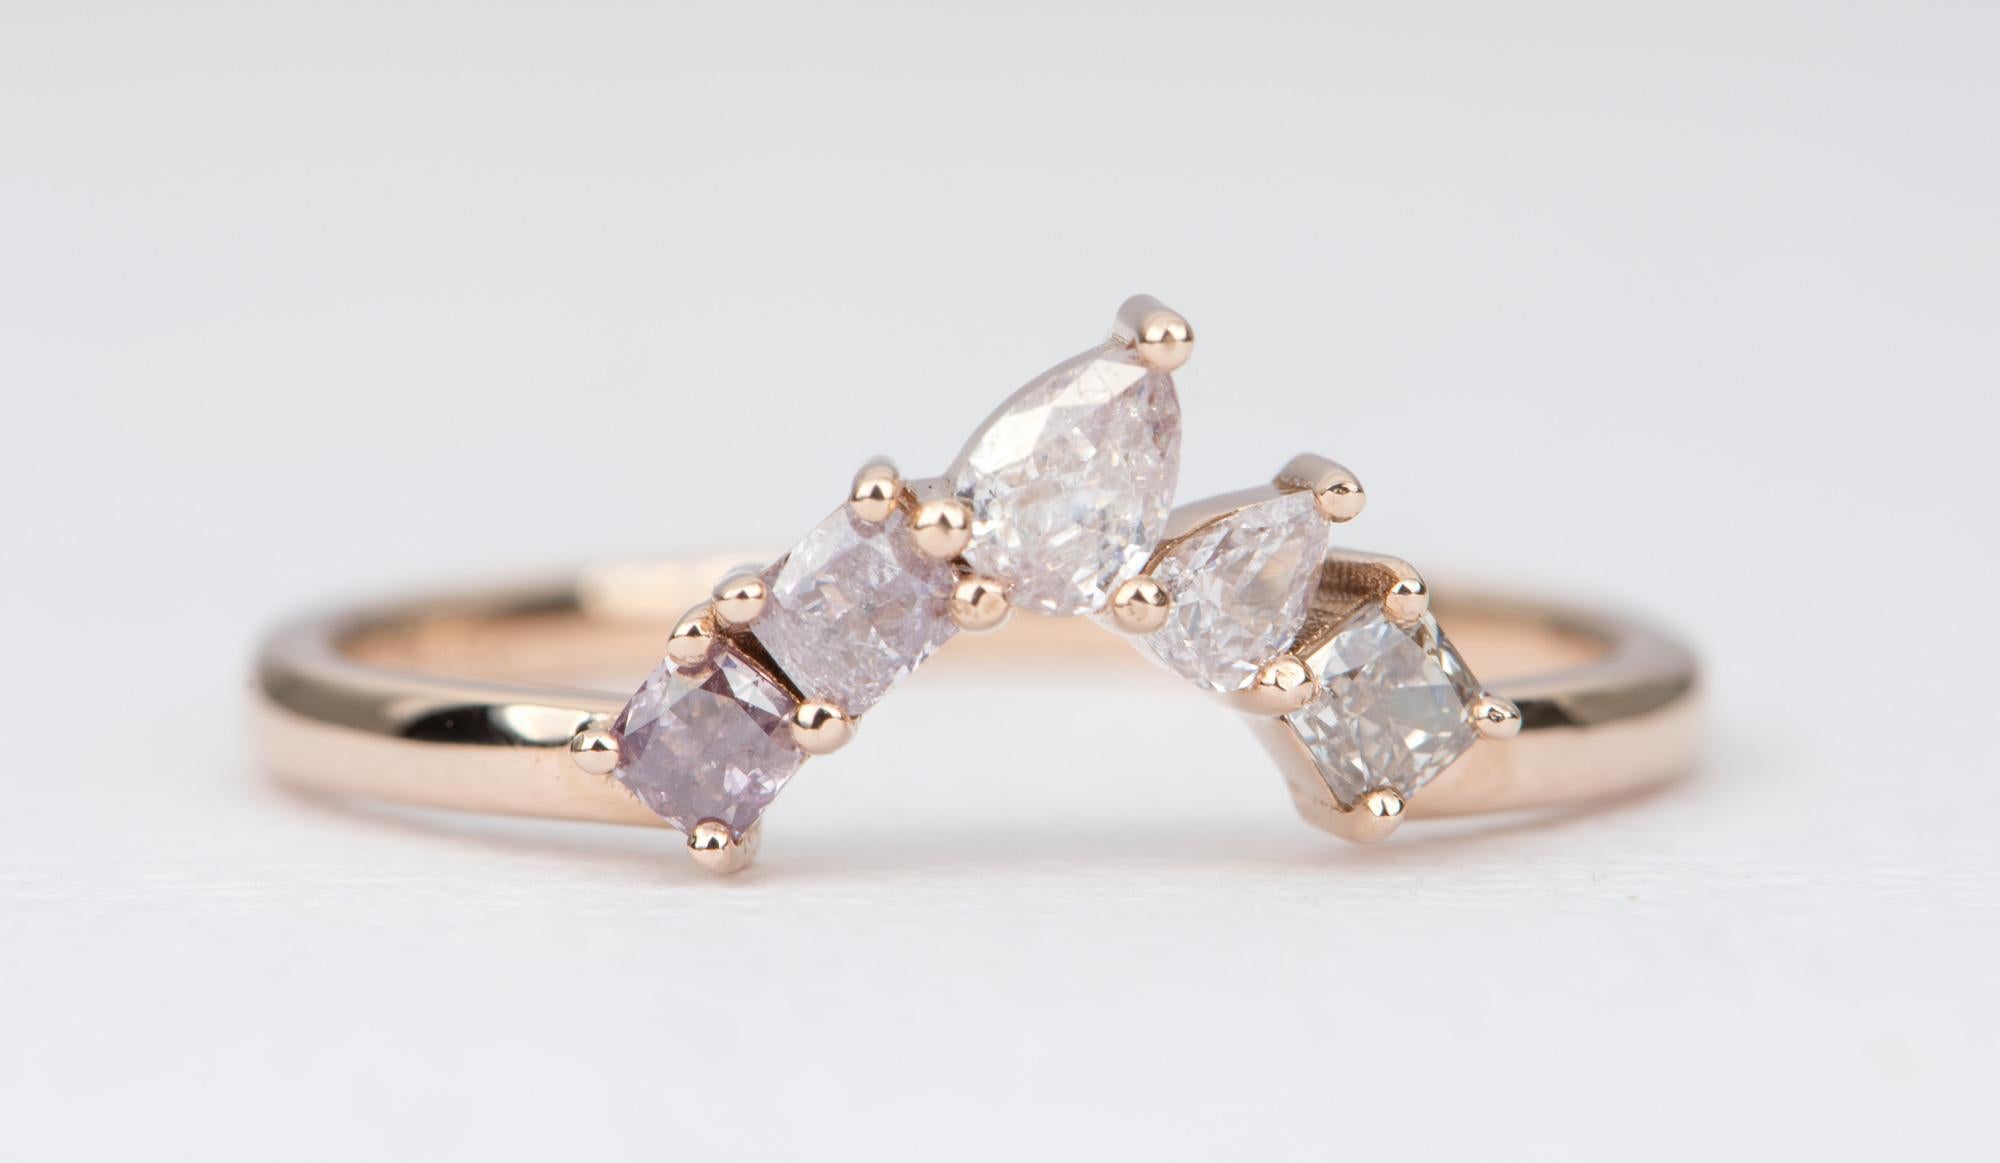 ♥ This is a made-to-order item and will take 6-8 weeks to complete.

♥  A 14k rose gold curve ring featuring natural pink diamonds forming a cluster and asymmetrical contour to perfectly complement your engagement ring  
♥  Each diamond is